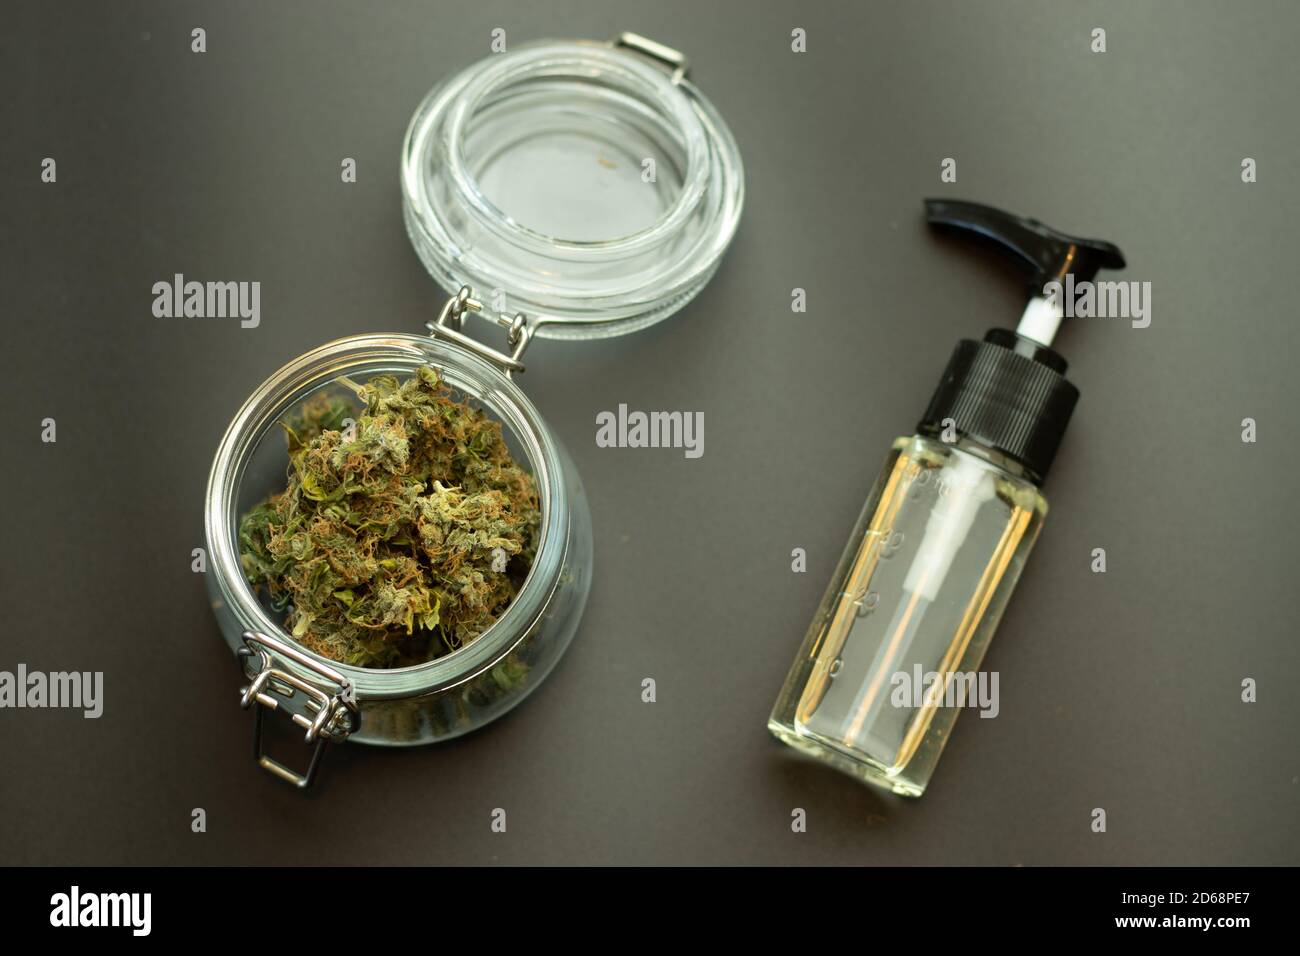 CBD herbal oil with cannabis buds in glass jar top view. Marijuana on black background. Weed business industry concept. Cannabidiol medical and Stock Photo